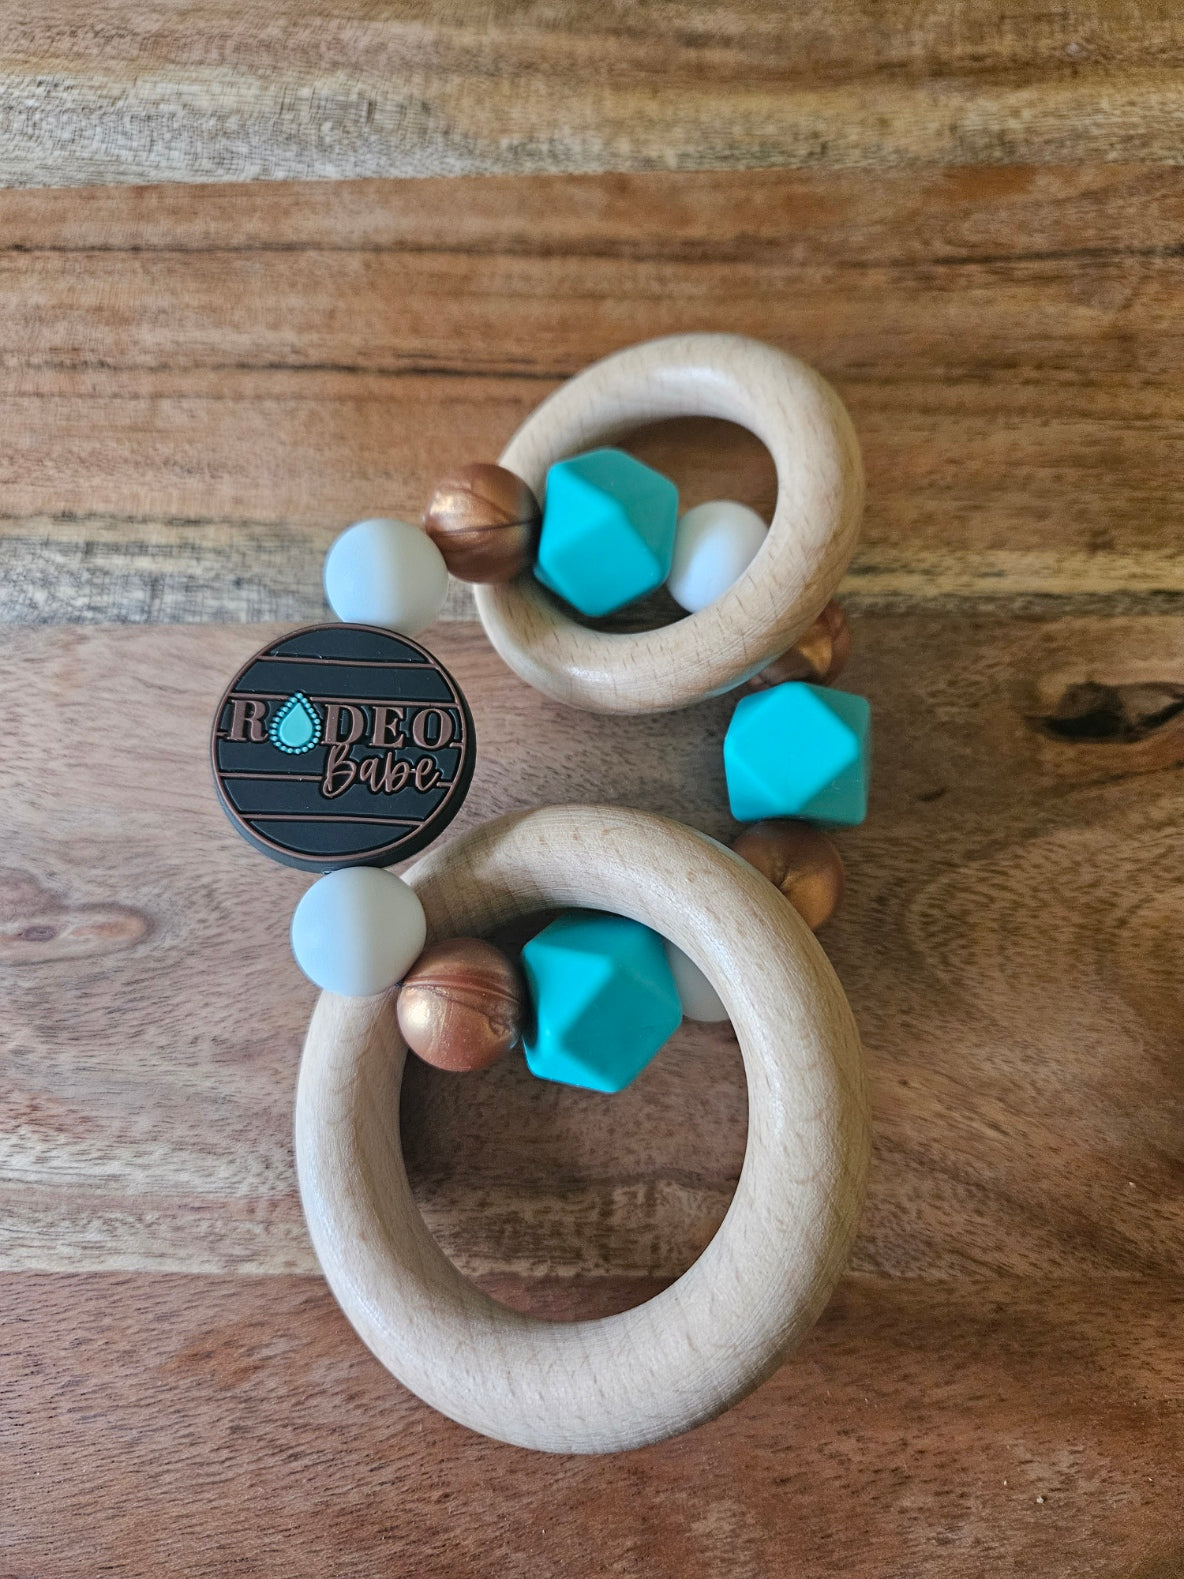 Rodeo Babe Silicone Teether Rattle